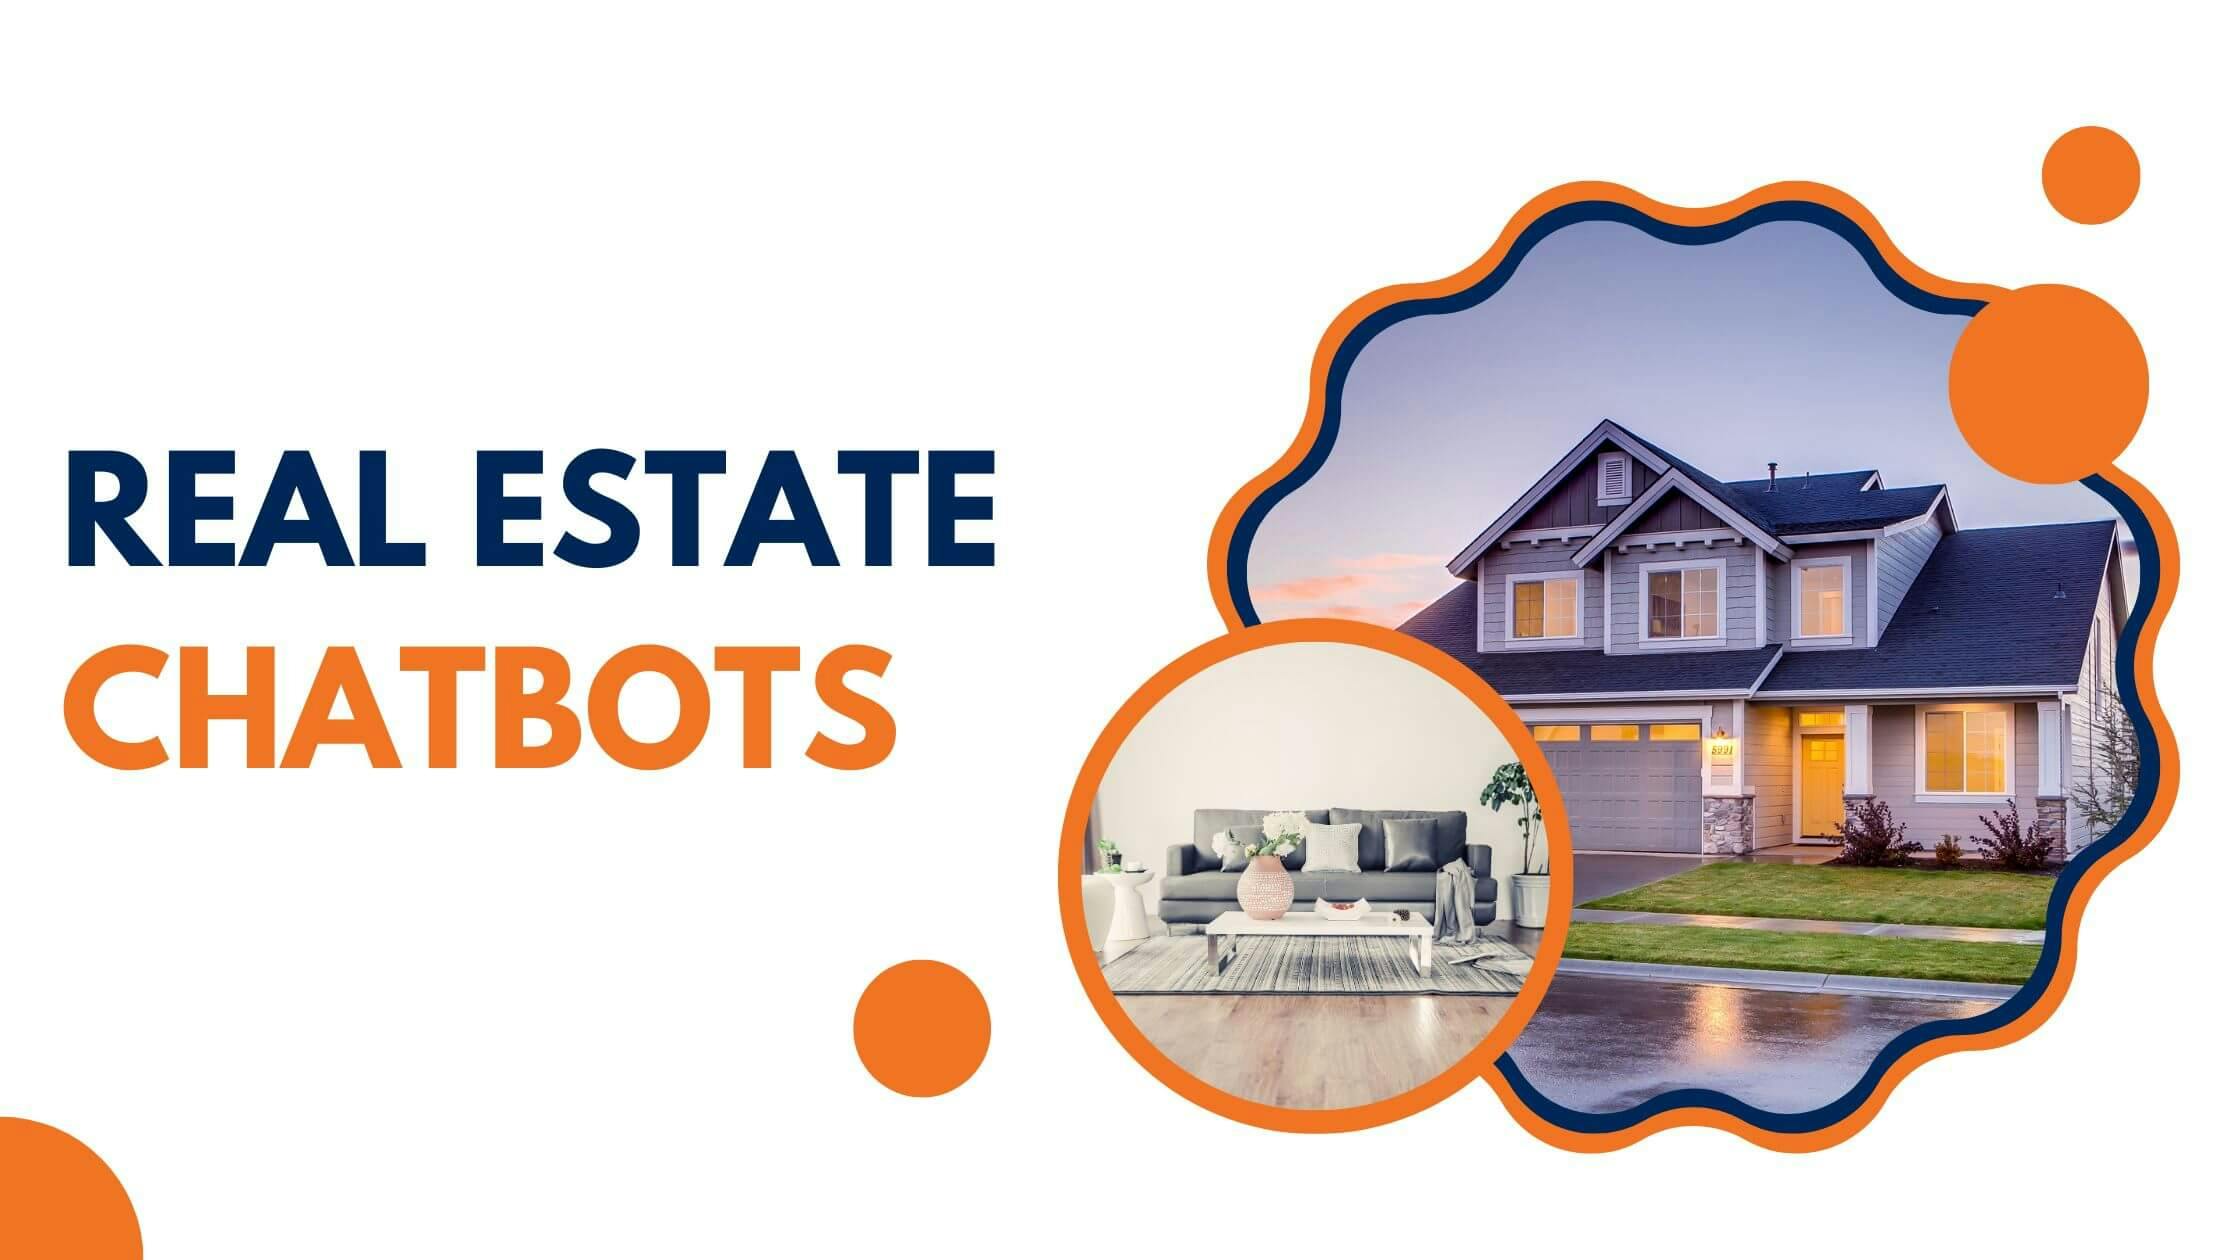 Our Picks for the Top 7 Real Estate Chatbots